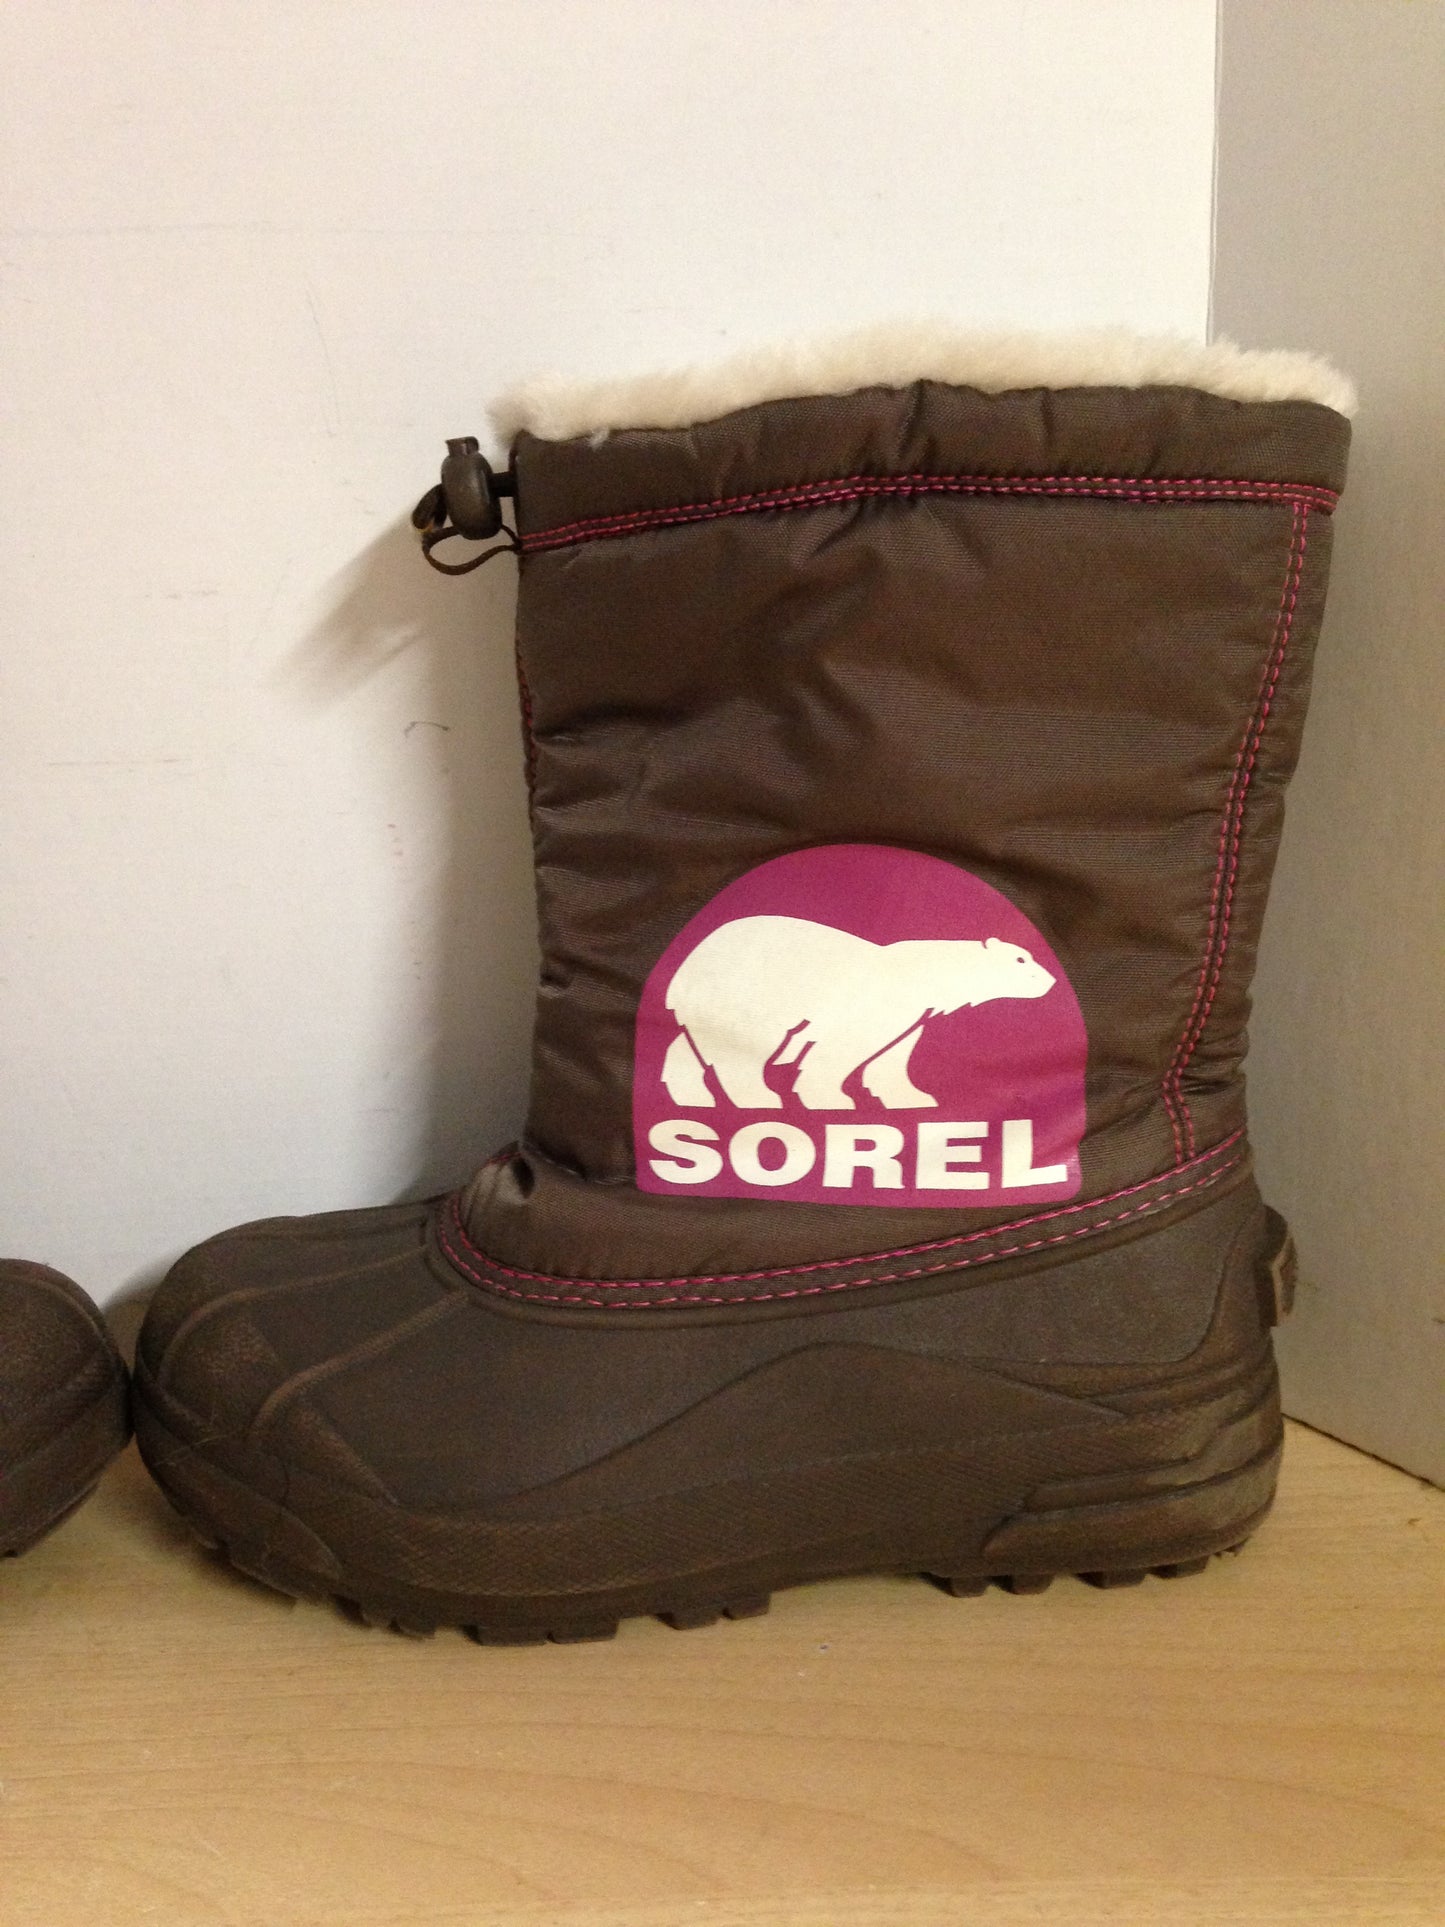 Winter Boots Child Size 4 Sorel Brown Pink Excellent